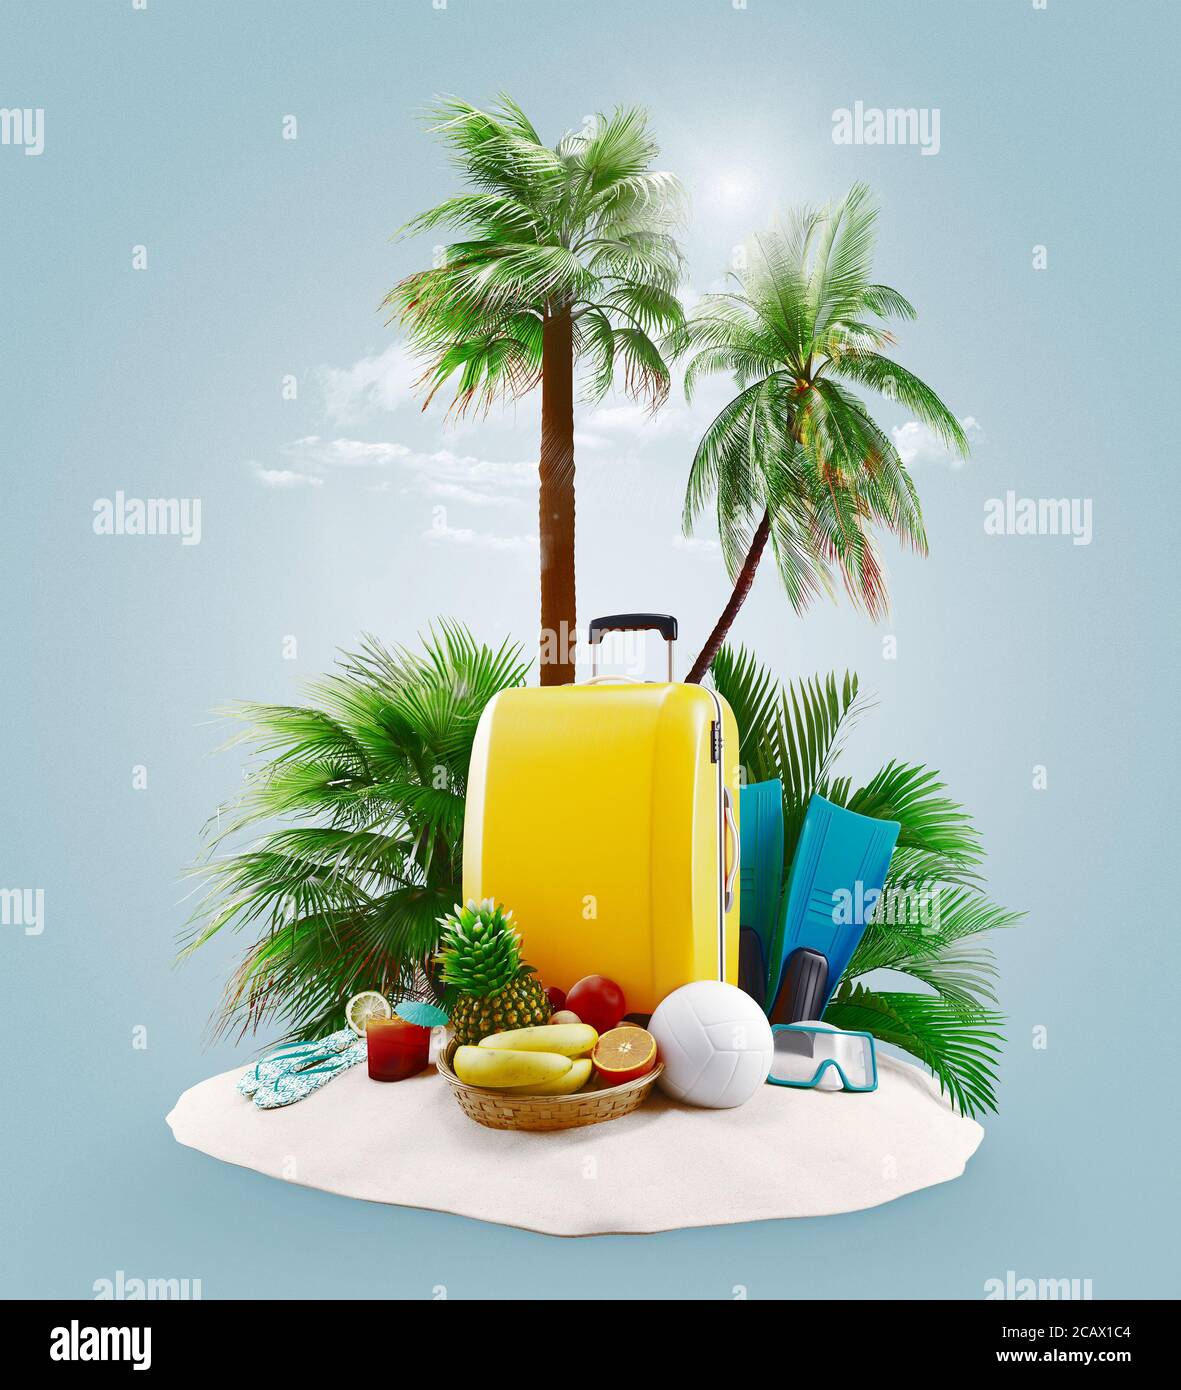 Suitcases with palms on the beach, island. Holiday or vacation concept. 3d rendering Stock Photo